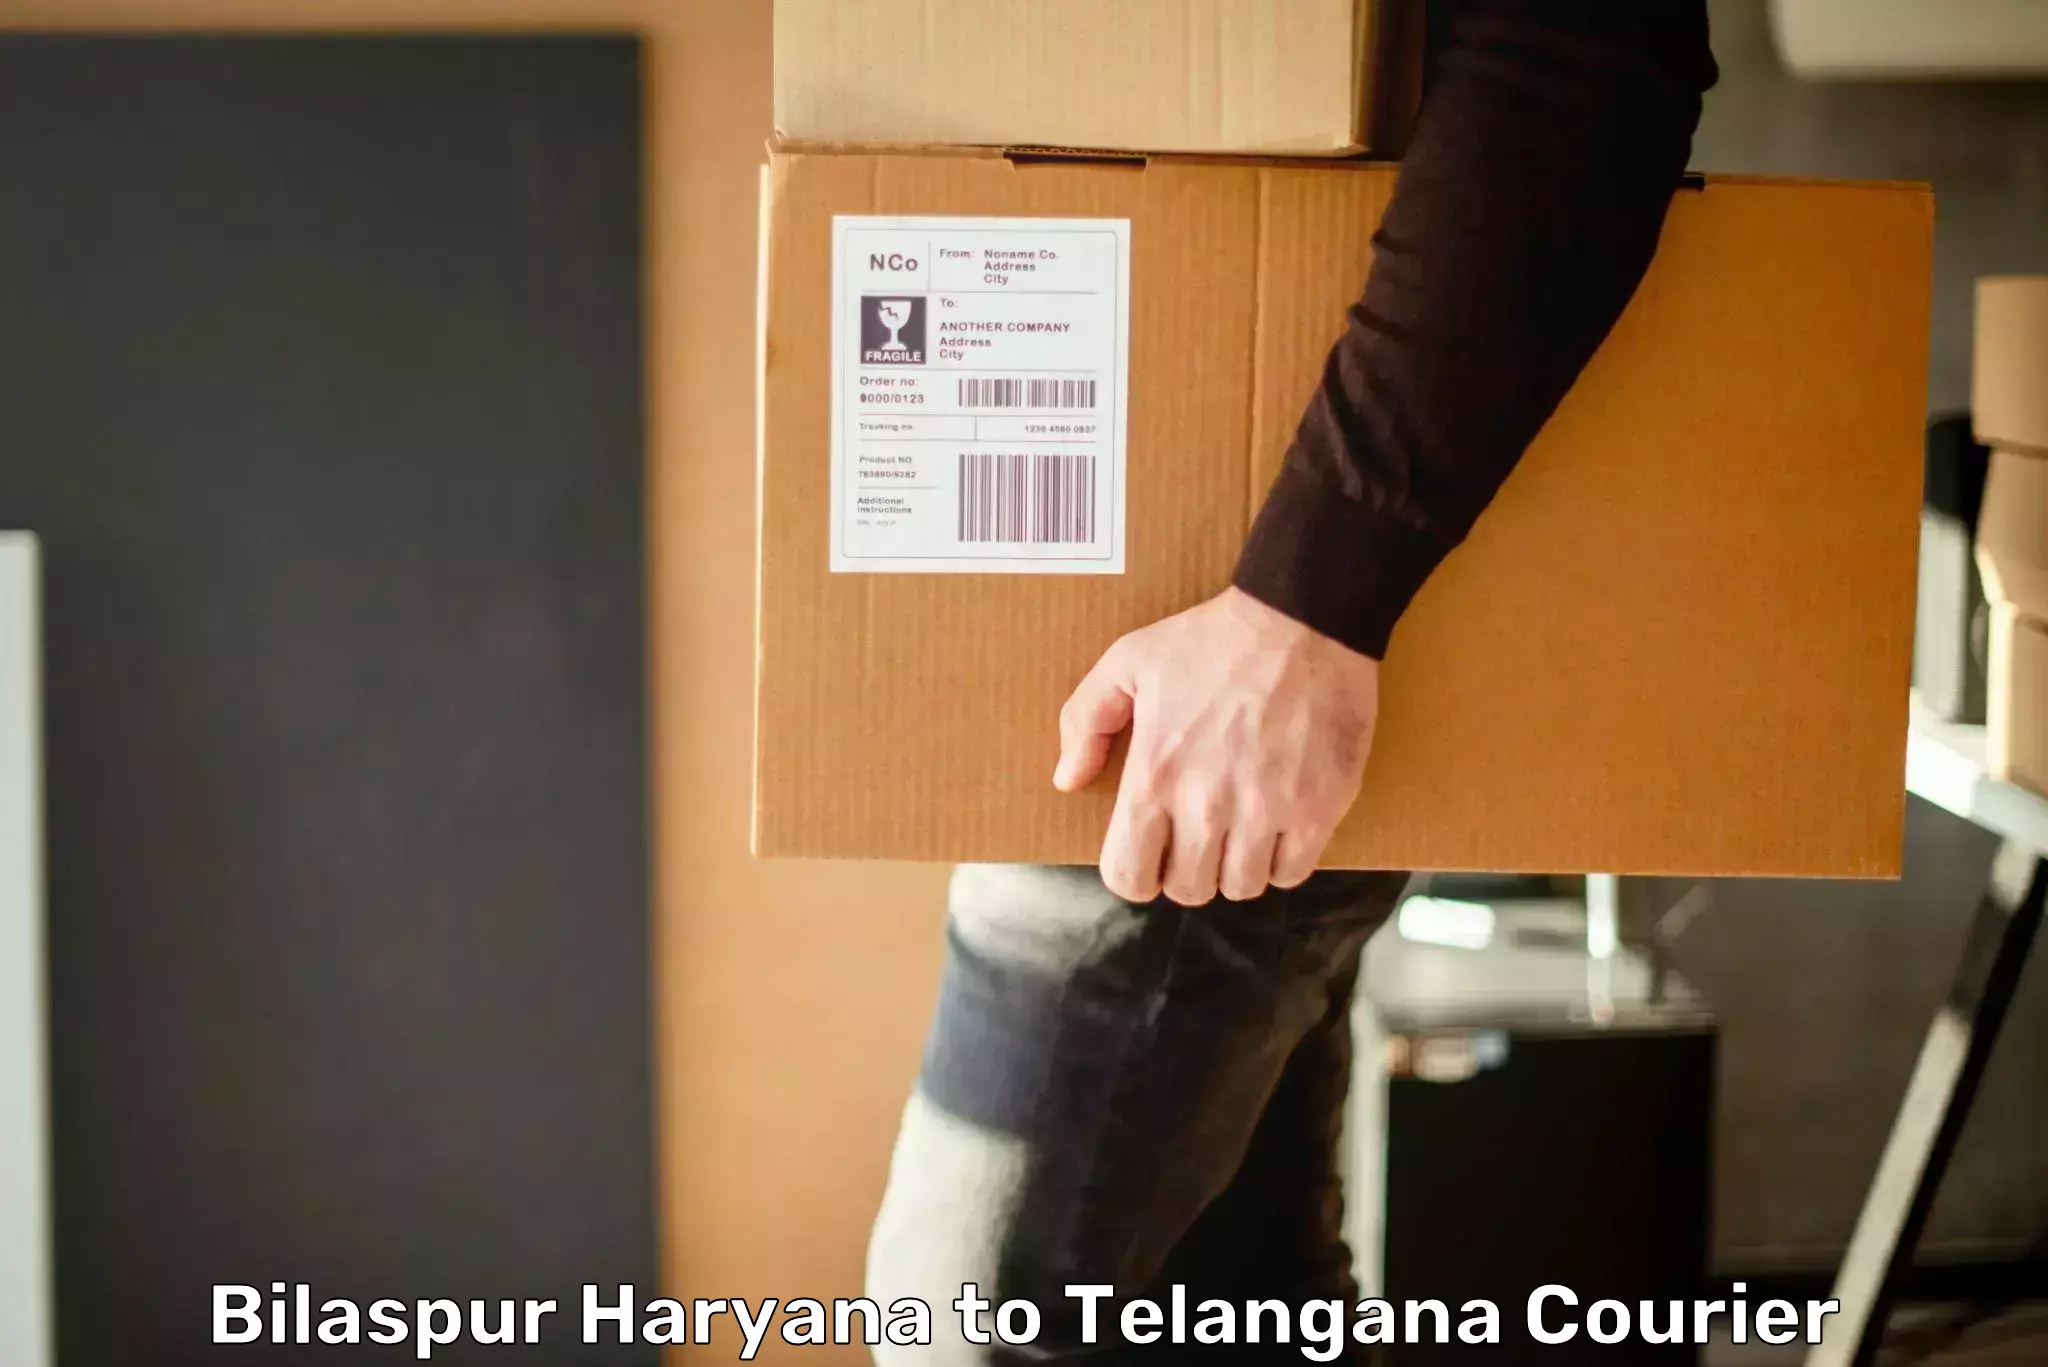 Medical delivery services Bilaspur Haryana to Secunderabad